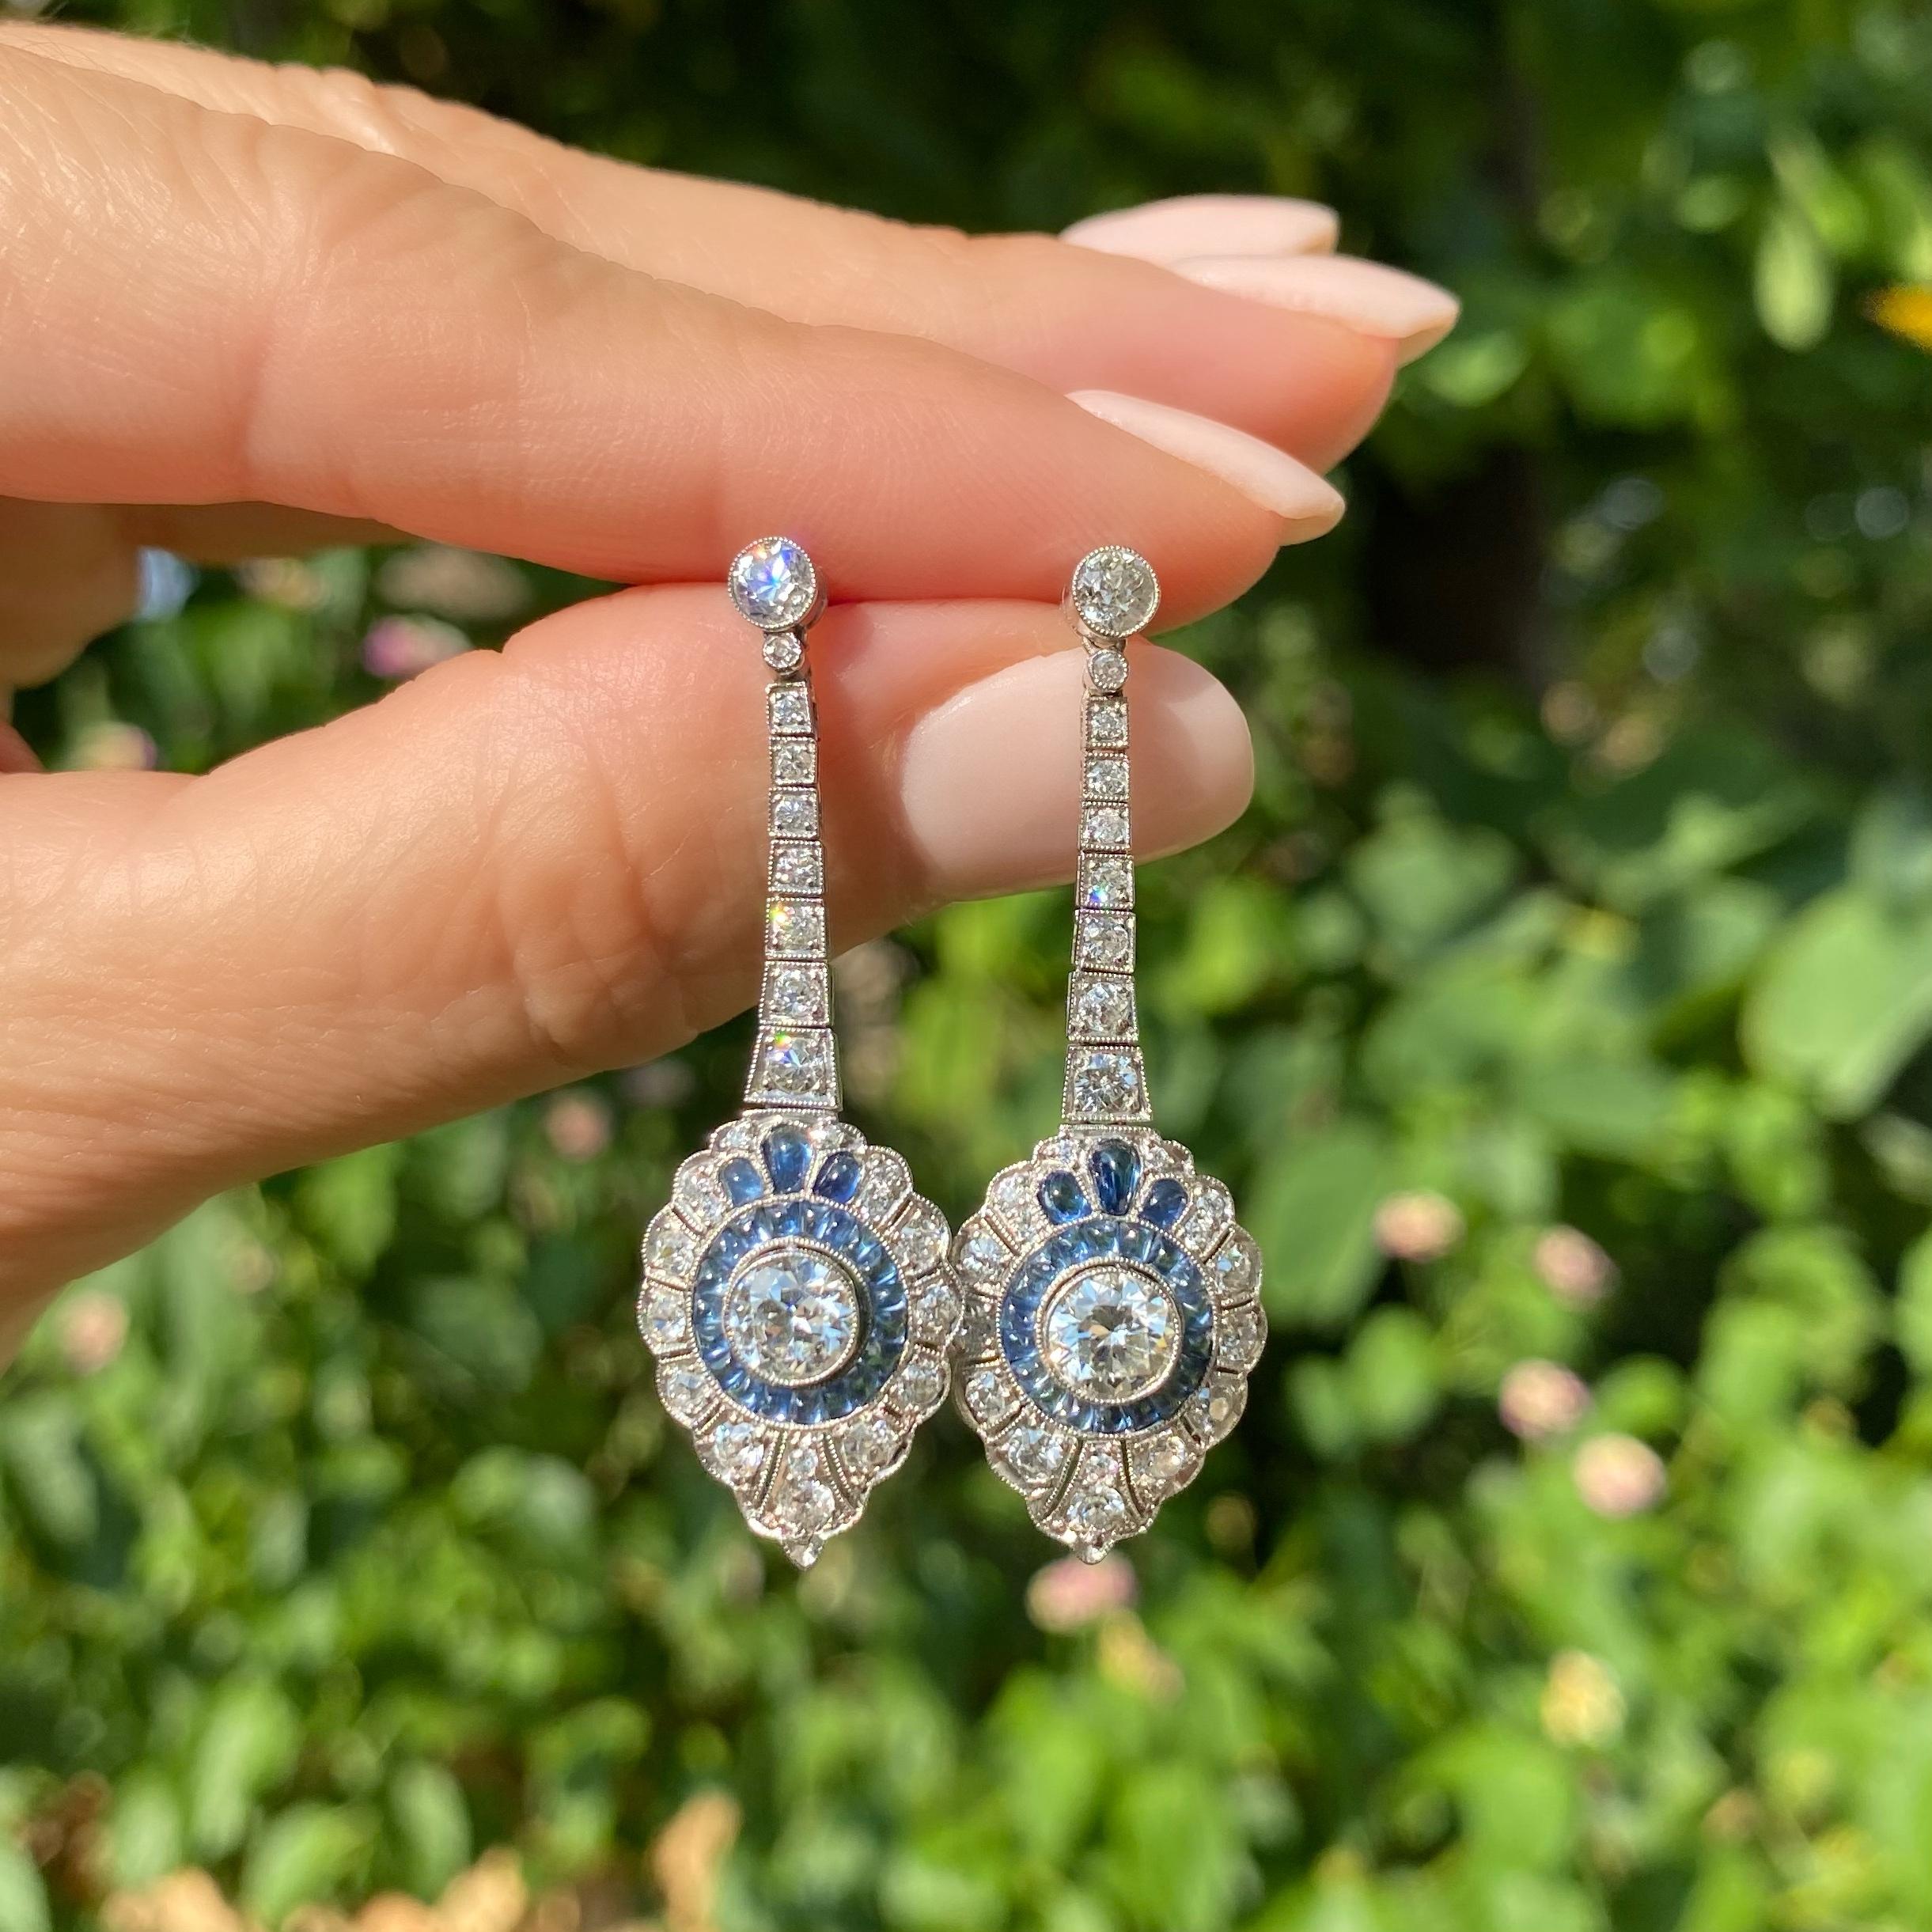 Simply Beautiful! Finely Detailed Art Deco Style Diamond and Blue Sapphire Chandelier Drop Earrings. Hand crafted in Platinum and Hand set with 2 round diamonds, approx. 1.10tcw, 42 Buff top Blue Sapphires, approx. 2.10tcw and 50 diamonds, approx.